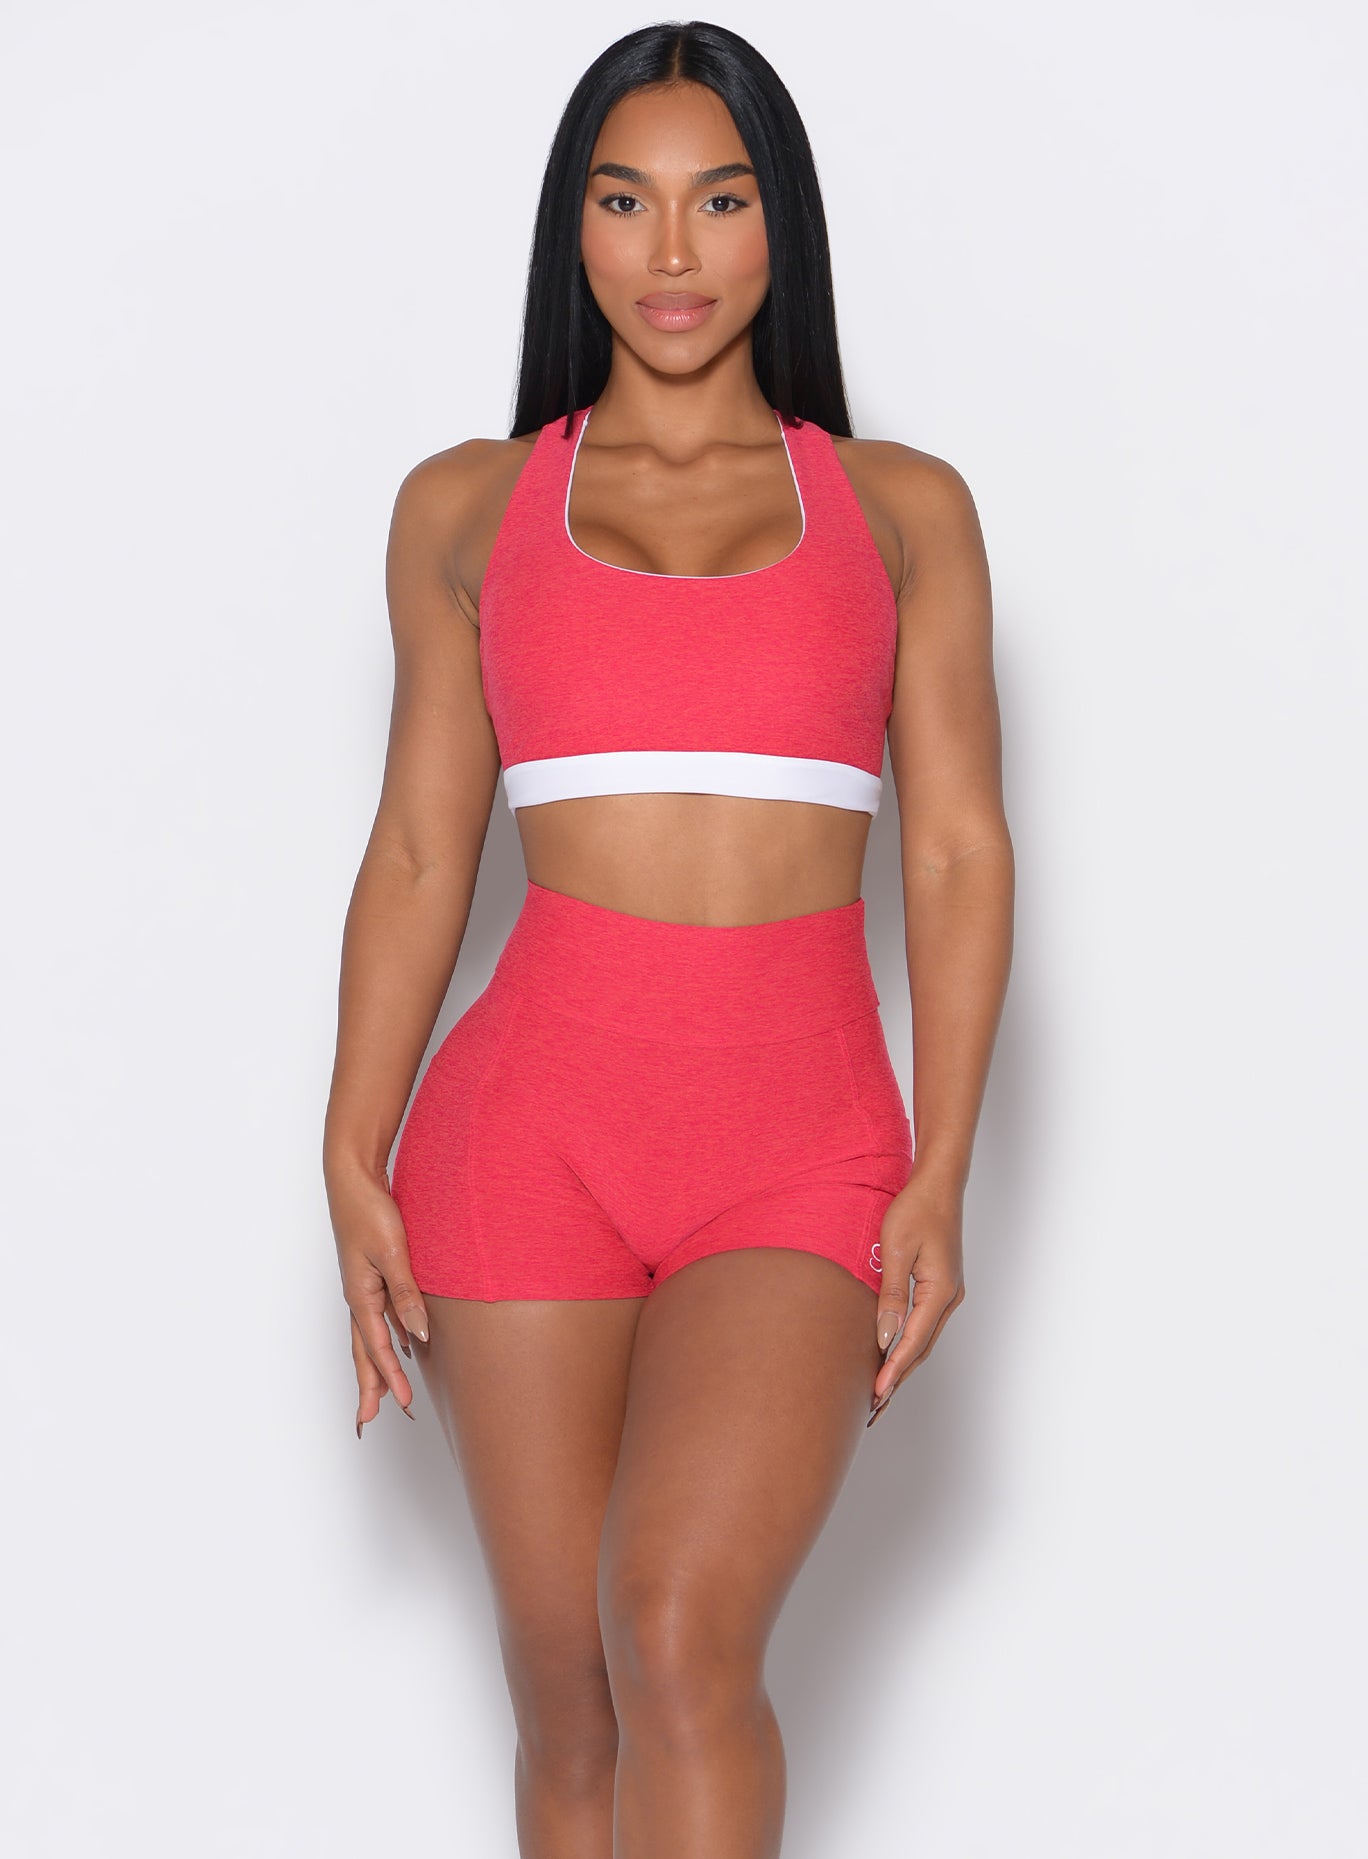 model facing forward wearing a reversible tank bra in raspberry punch color along with a matching shorts